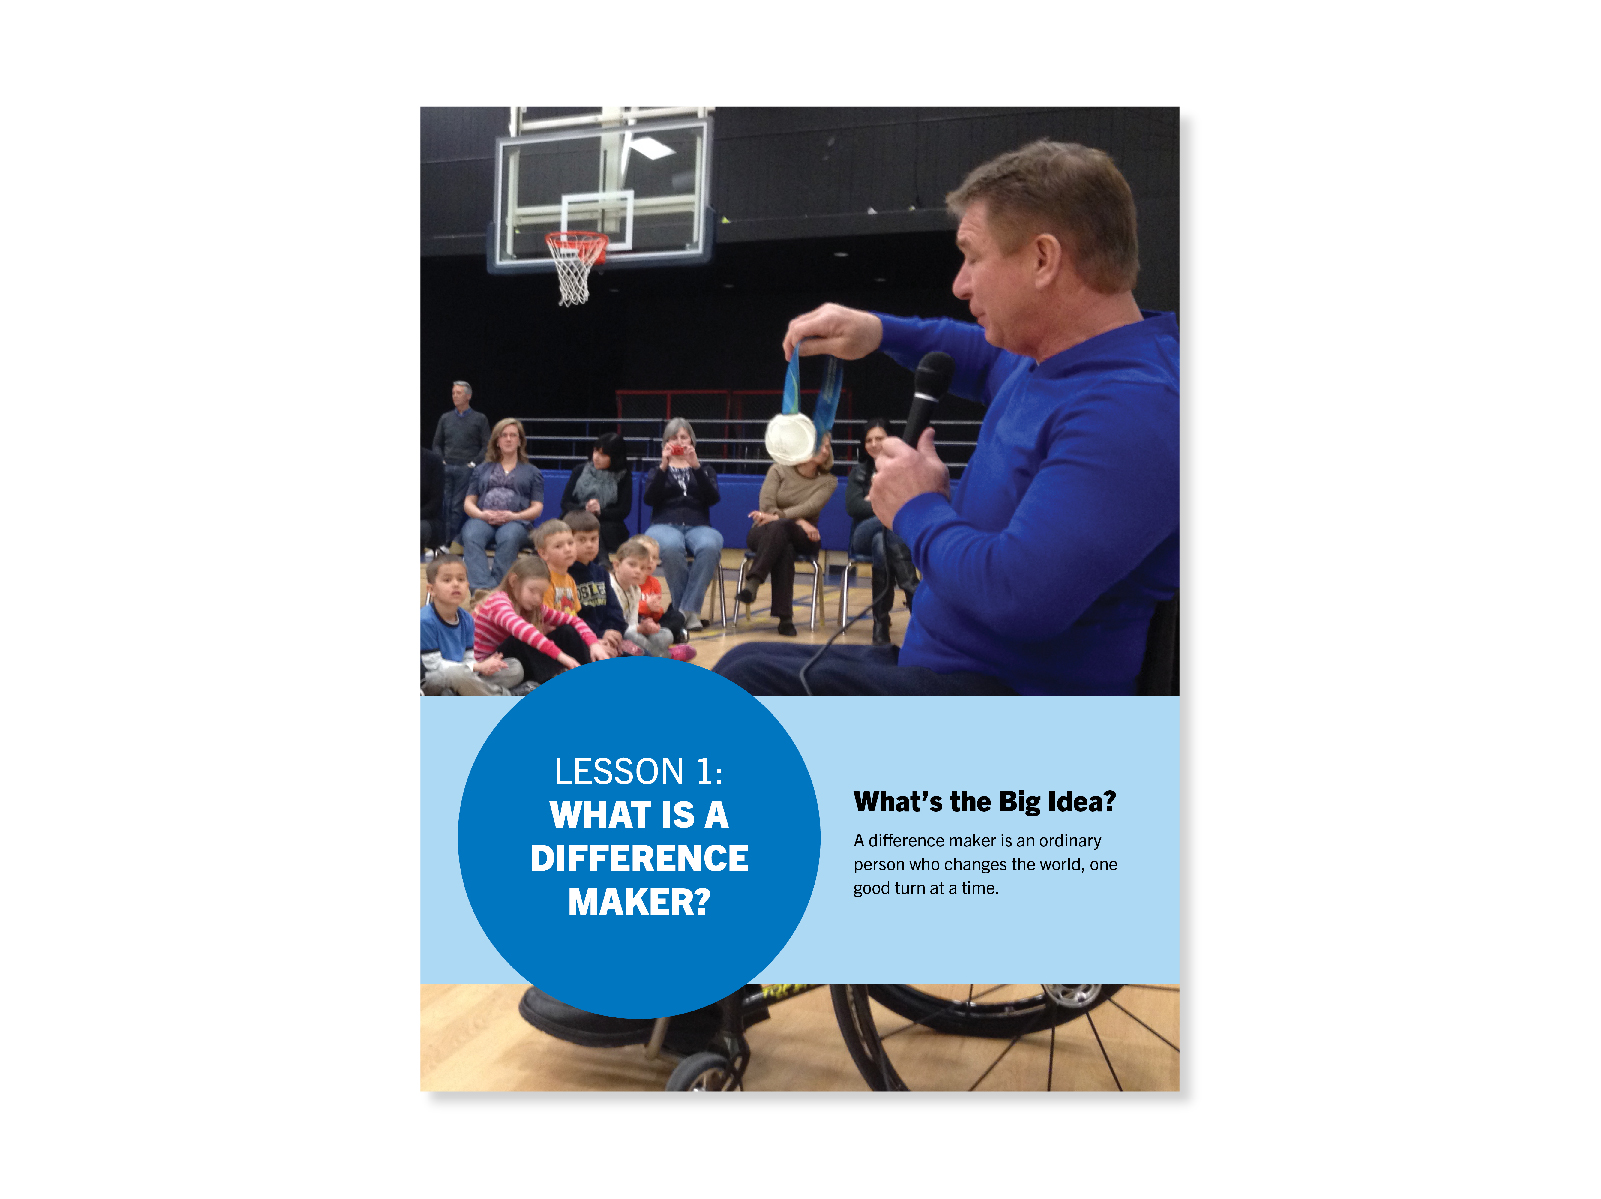 Rick Hansen shows a medal to students in a basketball court. Cover for Lesson 1: What is a Difference Maker?